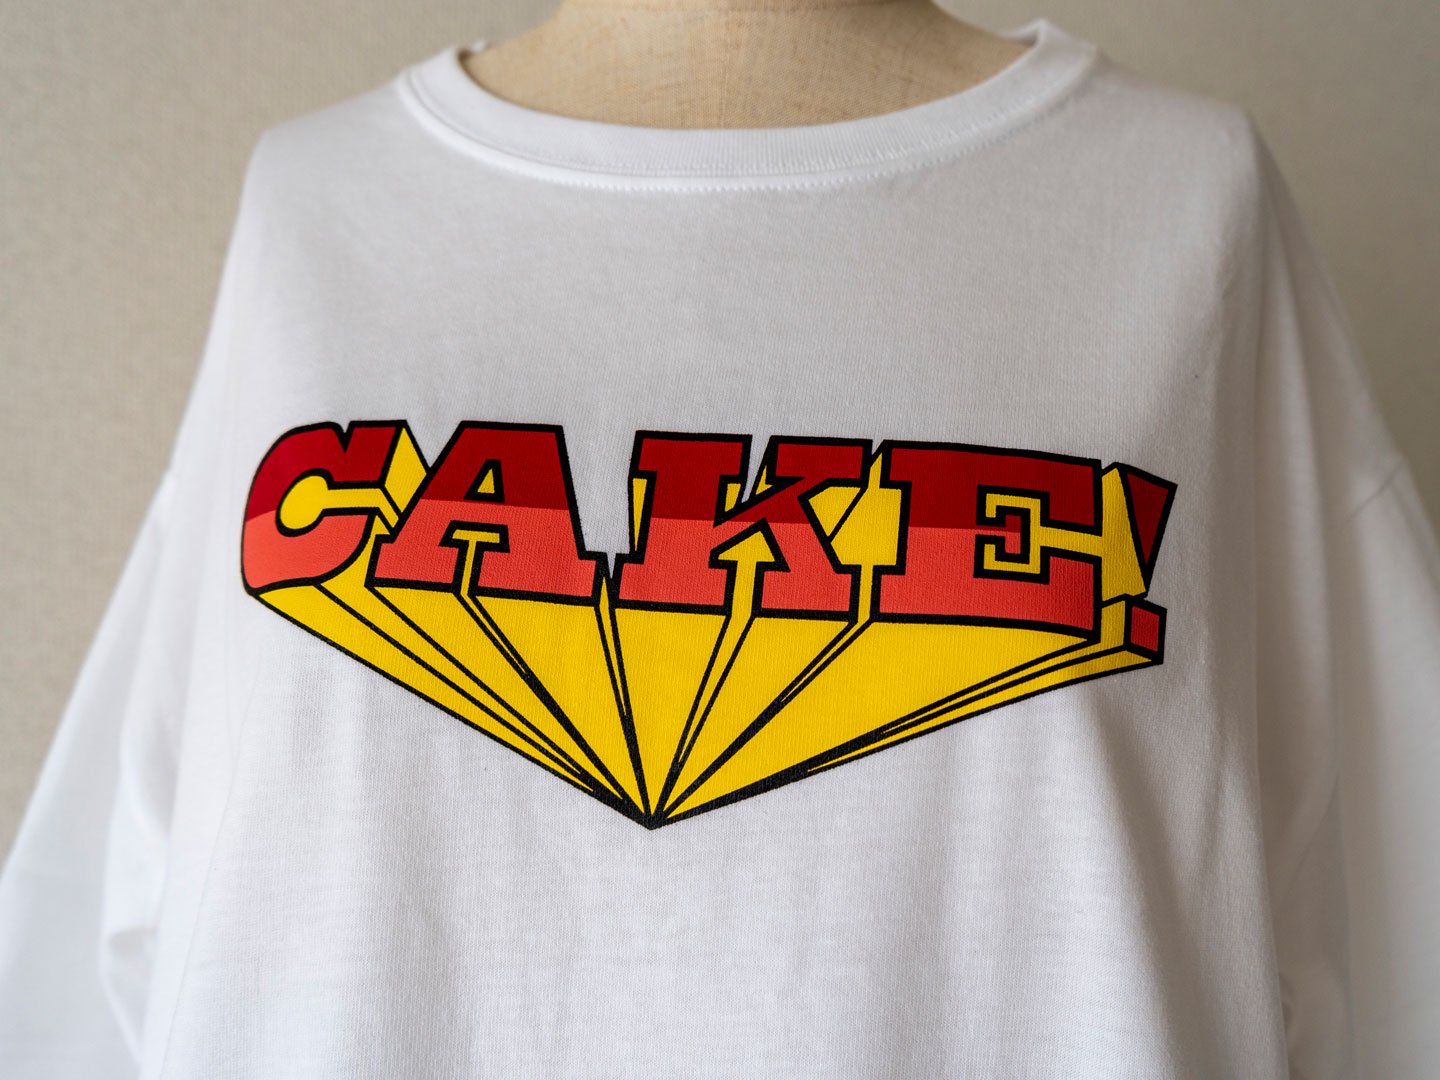 <img class='new_mark_img1' src='https://img.shop-pro.jp/img/new/icons21.gif' style='border:none;display:inline;margin:0px;padding:0px;width:auto;' />T-ShirtCAKE!